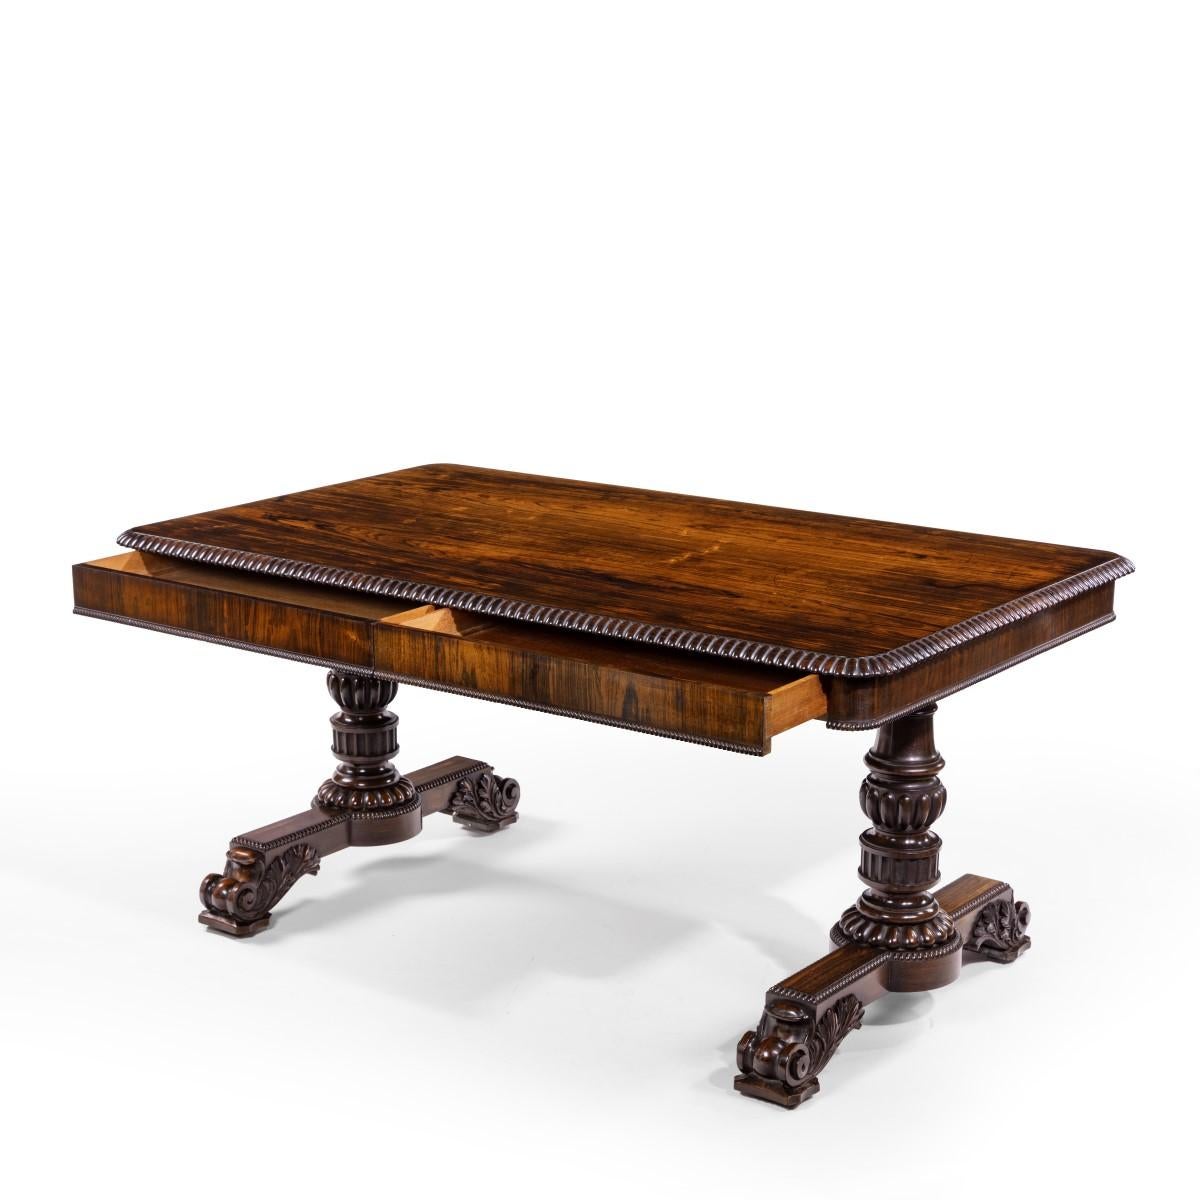 William iv Rosewood Partners’ Library Table by Gillows 1